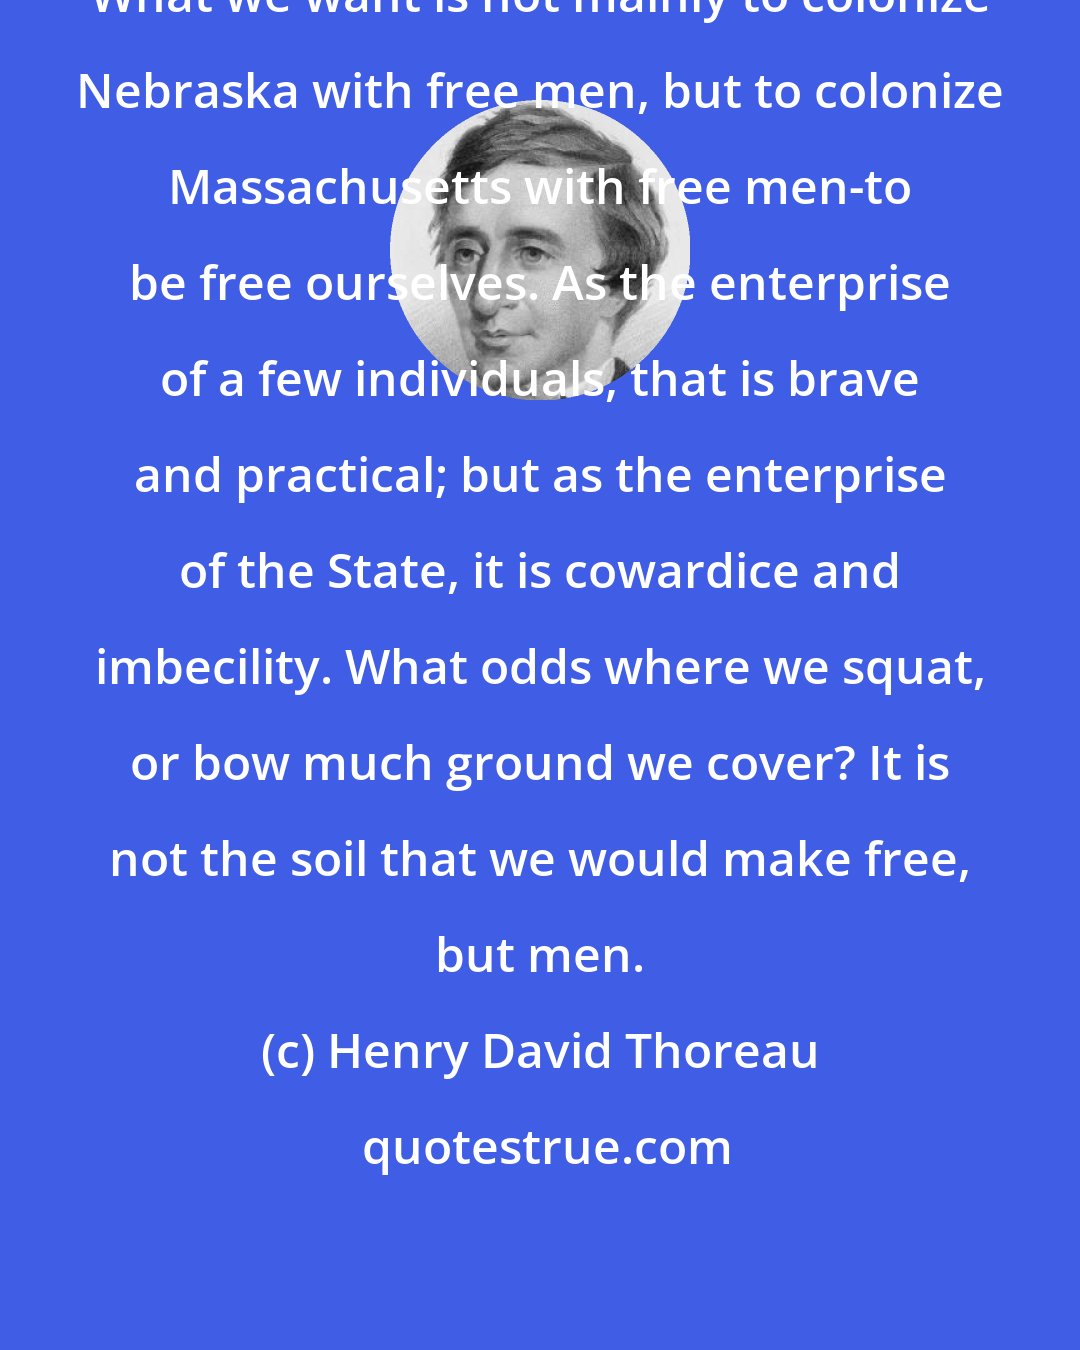 Henry David Thoreau: What we want is not mainly to colonize Nebraska with free men, but to colonize Massachusetts with free men-to be free ourselves. As the enterprise of a few individuals, that is brave and practical; but as the enterprise of the State, it is cowardice and imbecility. What odds where we squat, or bow much ground we cover? It is not the soil that we would make free, but men.